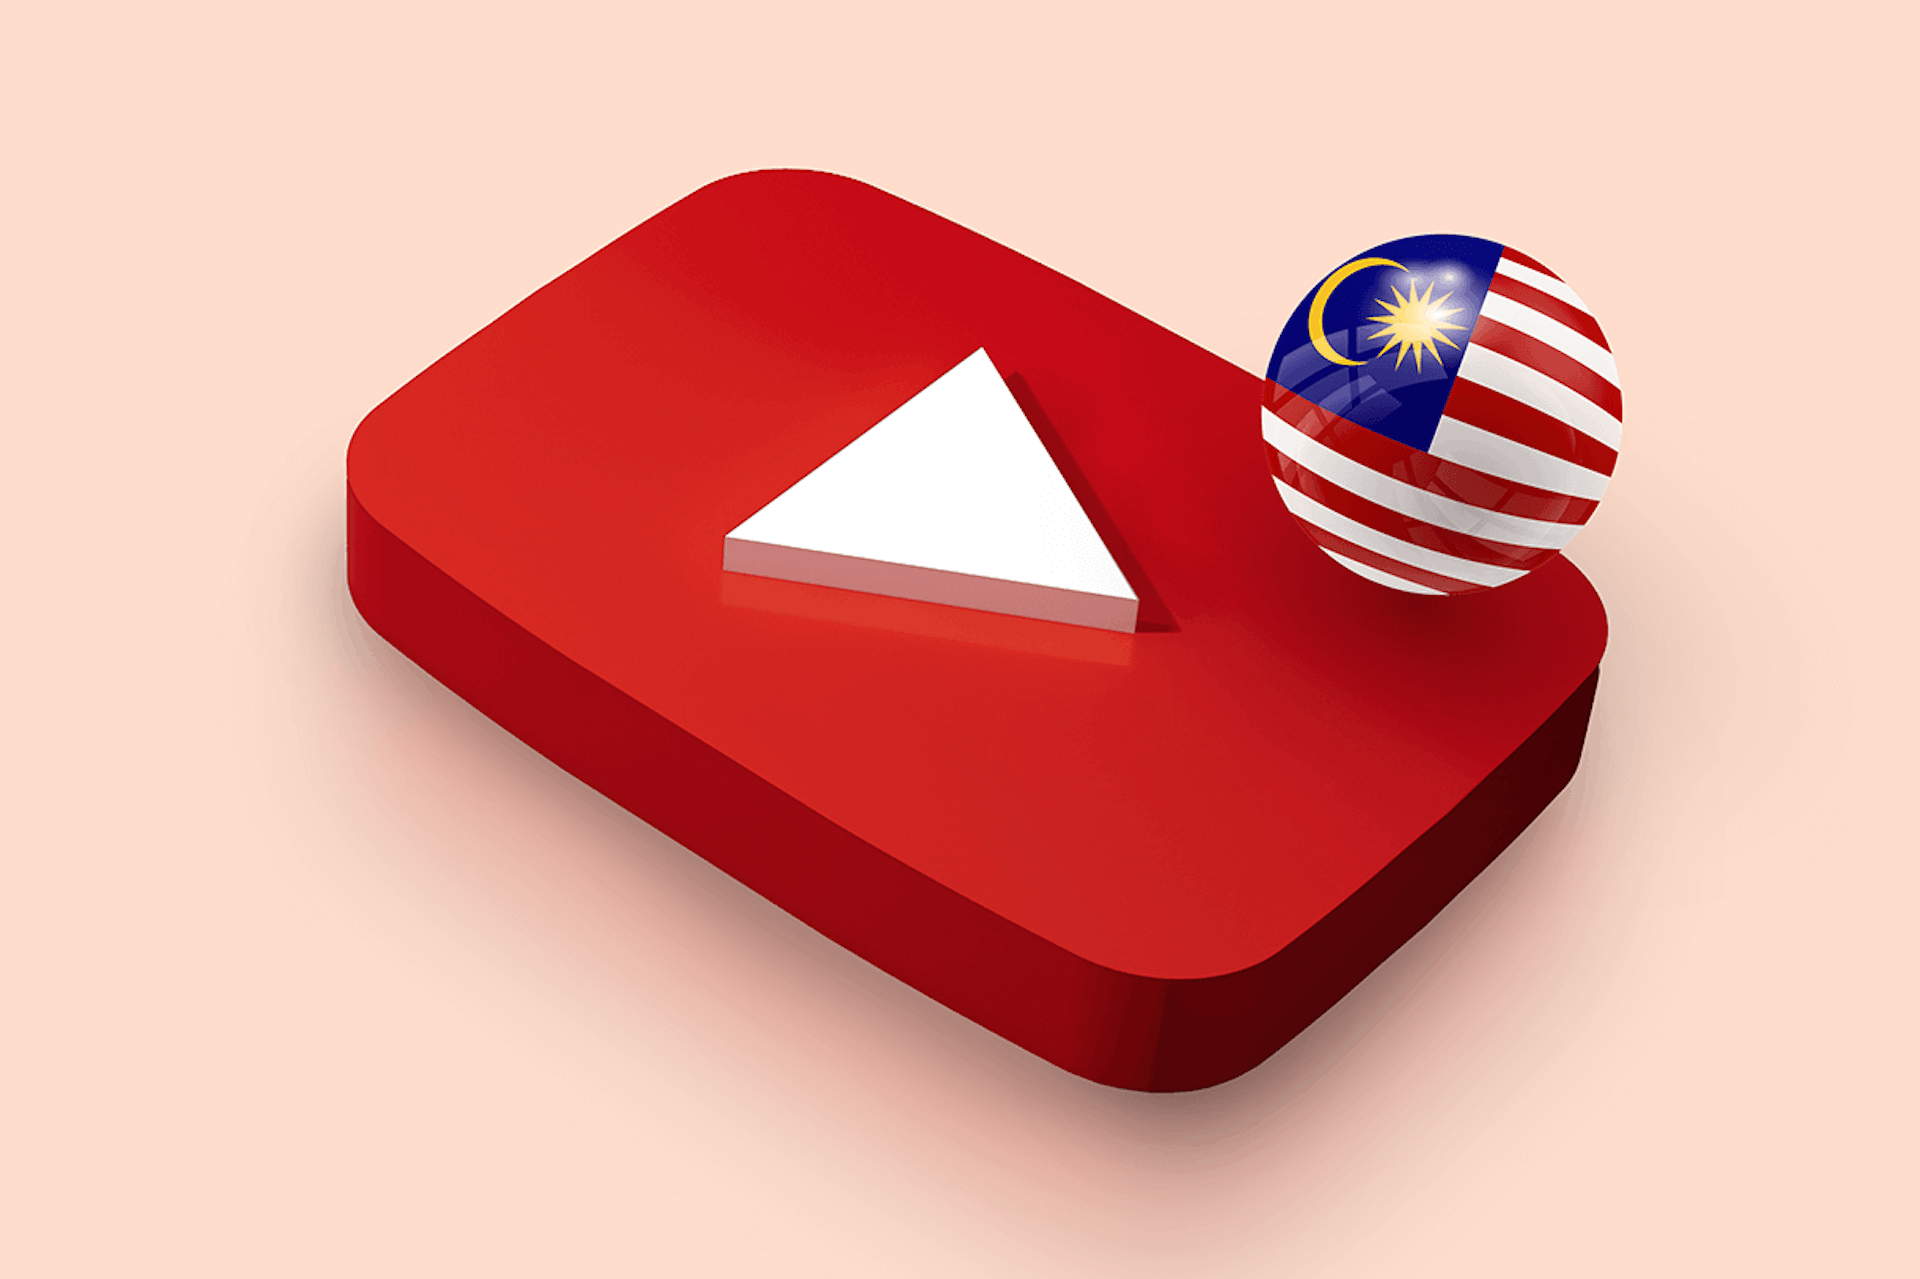 3D illustration of the YouTube logo next to the Malaysian flag for our blog with the top Malaysian YouTubers